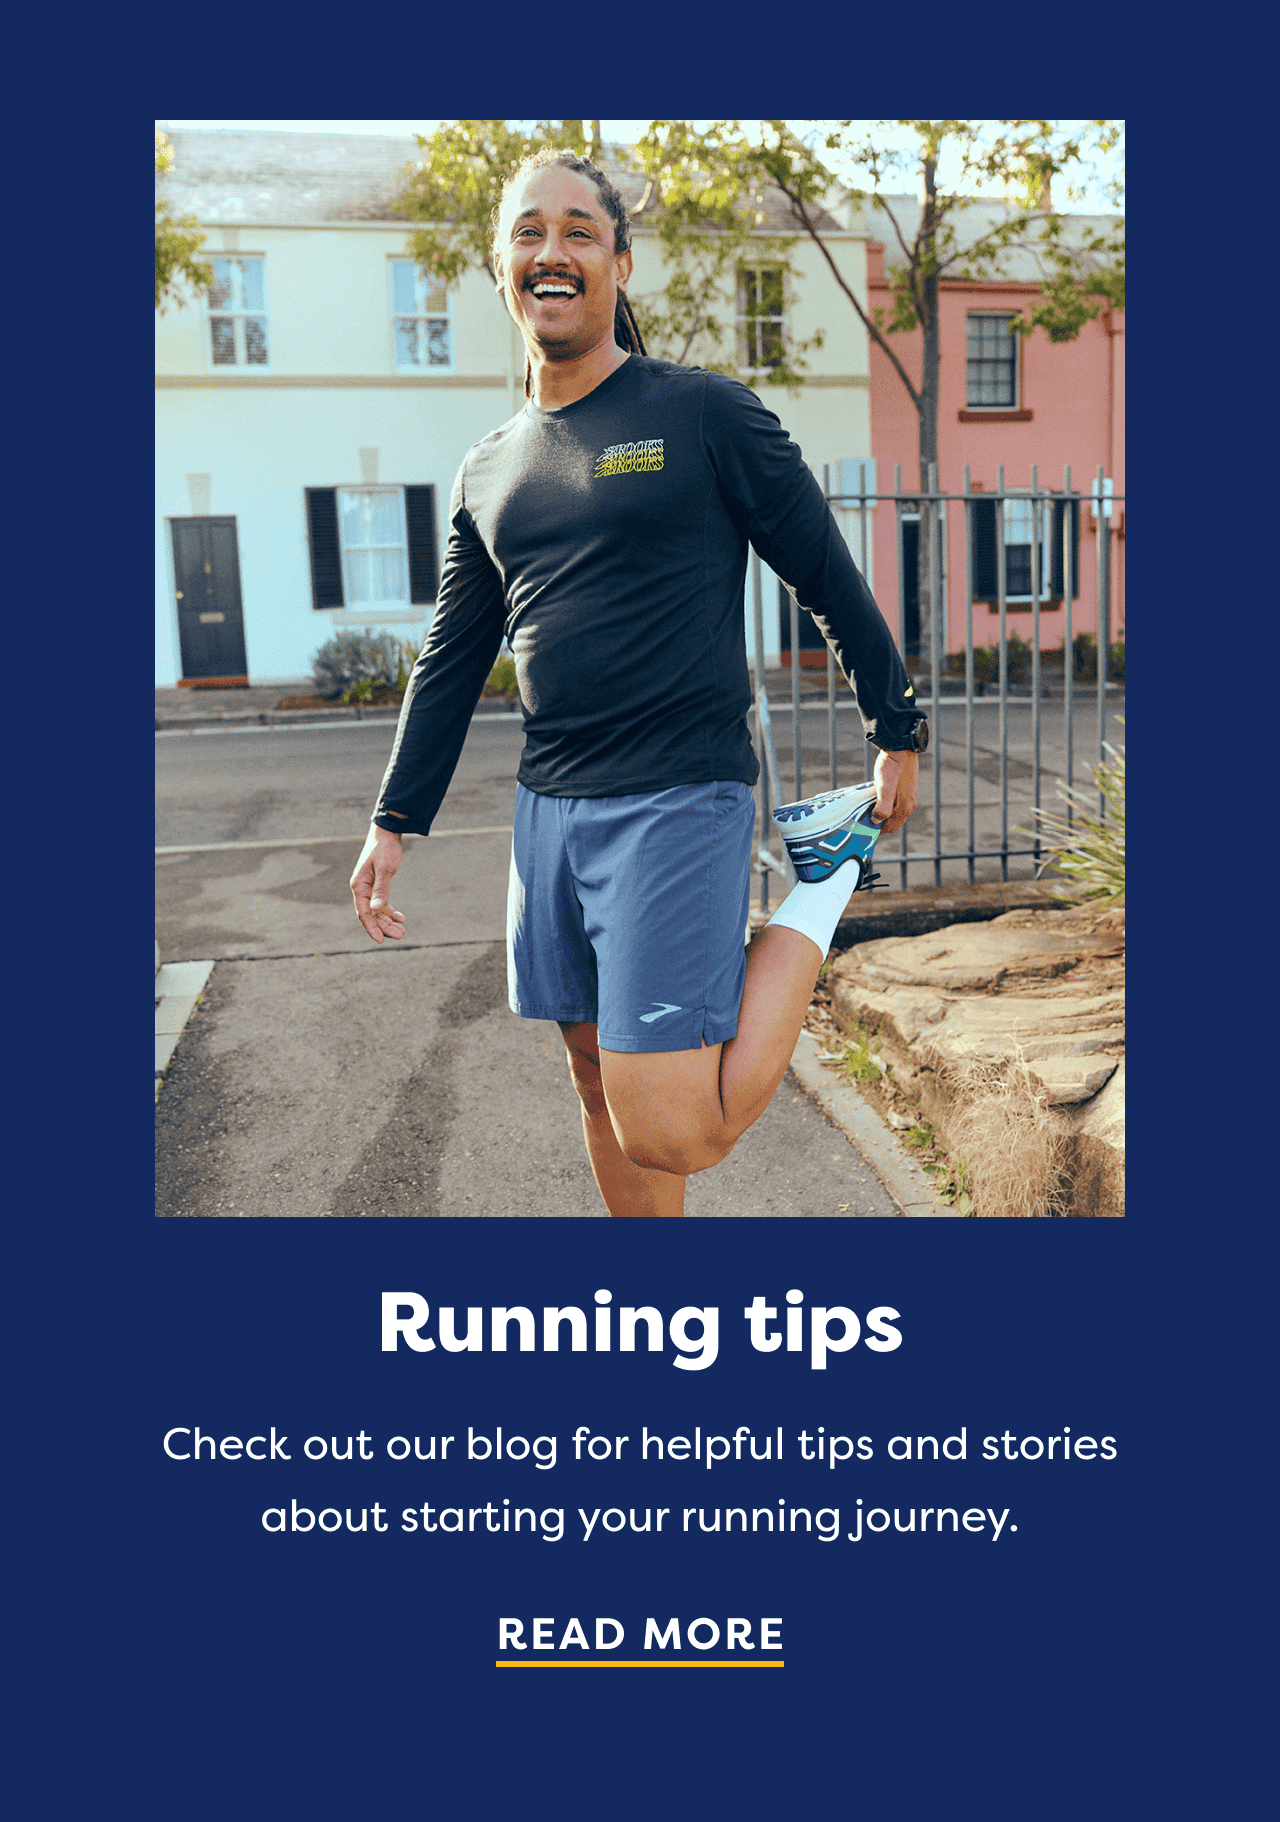 Running tips - Check out our blog for helpful tips and stories about starting your running journey. | Read more